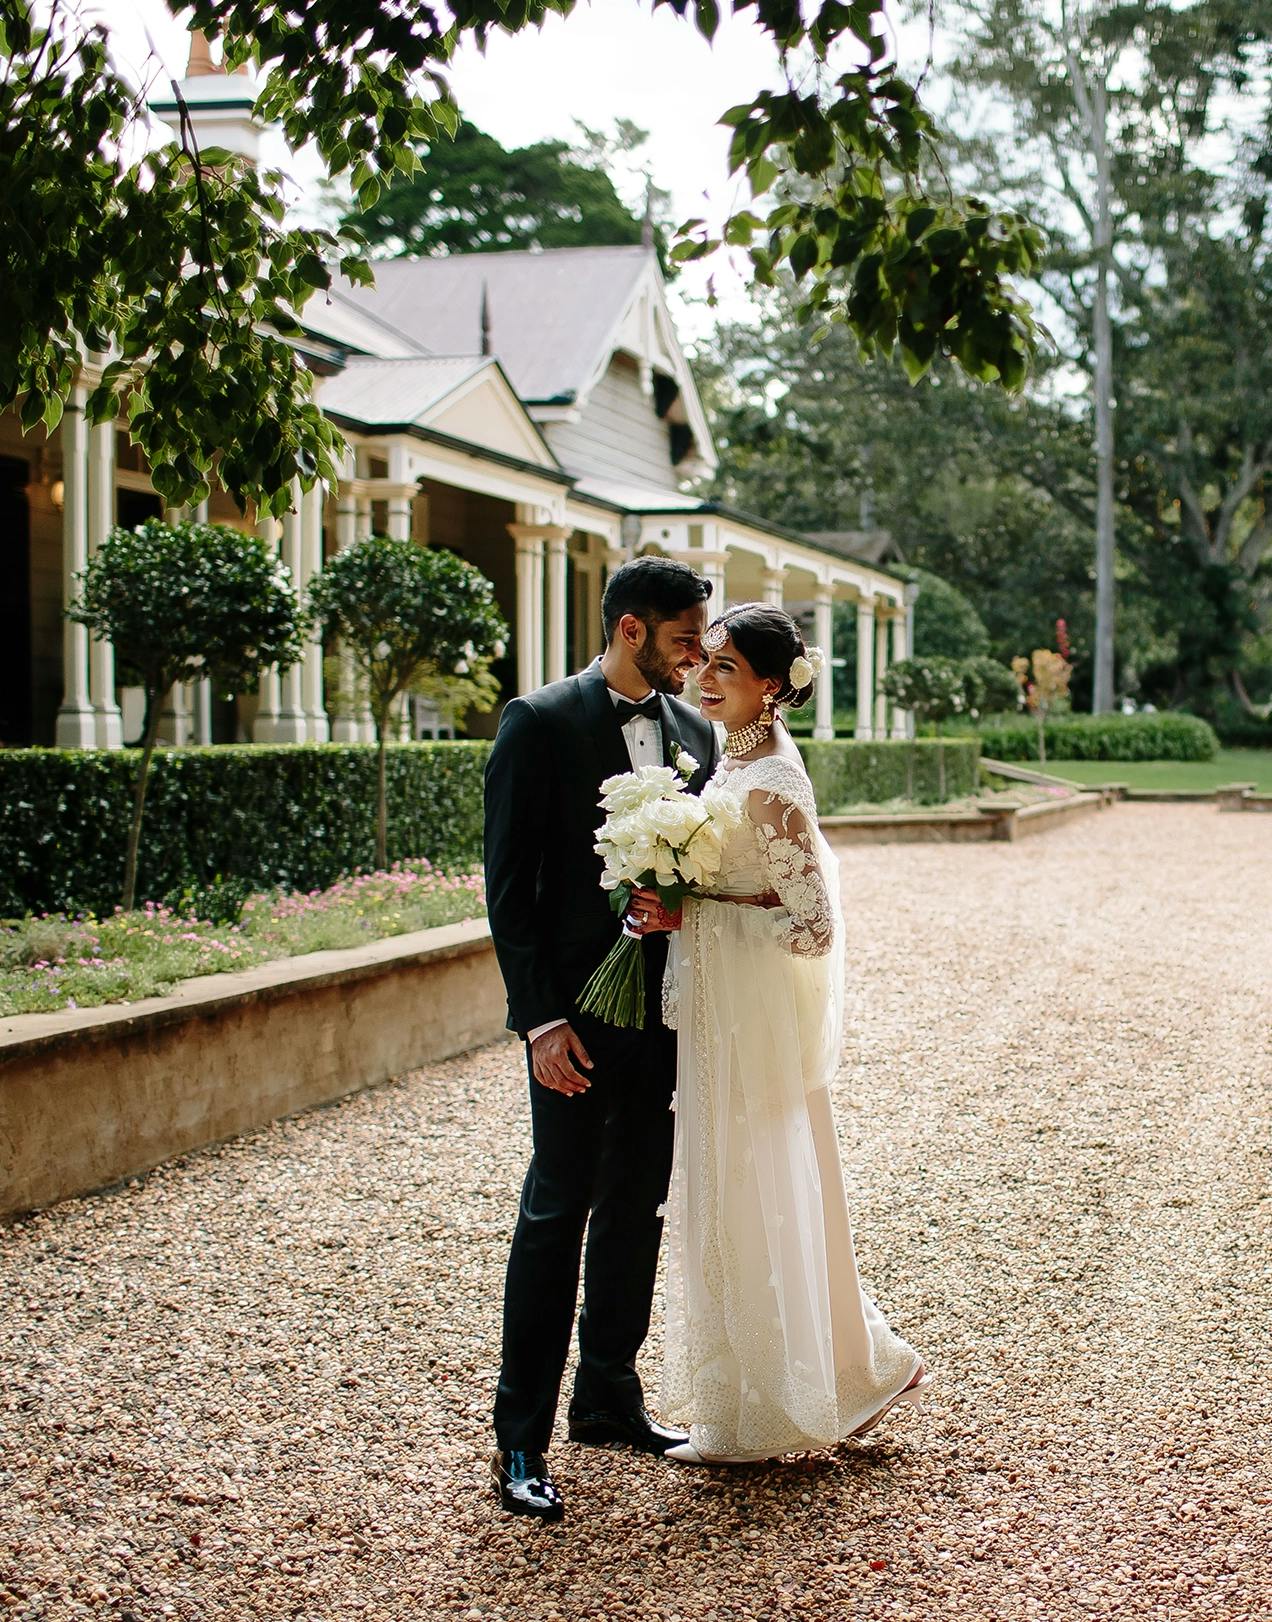 A bride and groom stand close together on a gravel path in front of a charming building, surrounded by greenery. The bride, in a white lace gown, holds a bouquet of white flowers, while the groom, in a black suit, leans in affectionately.